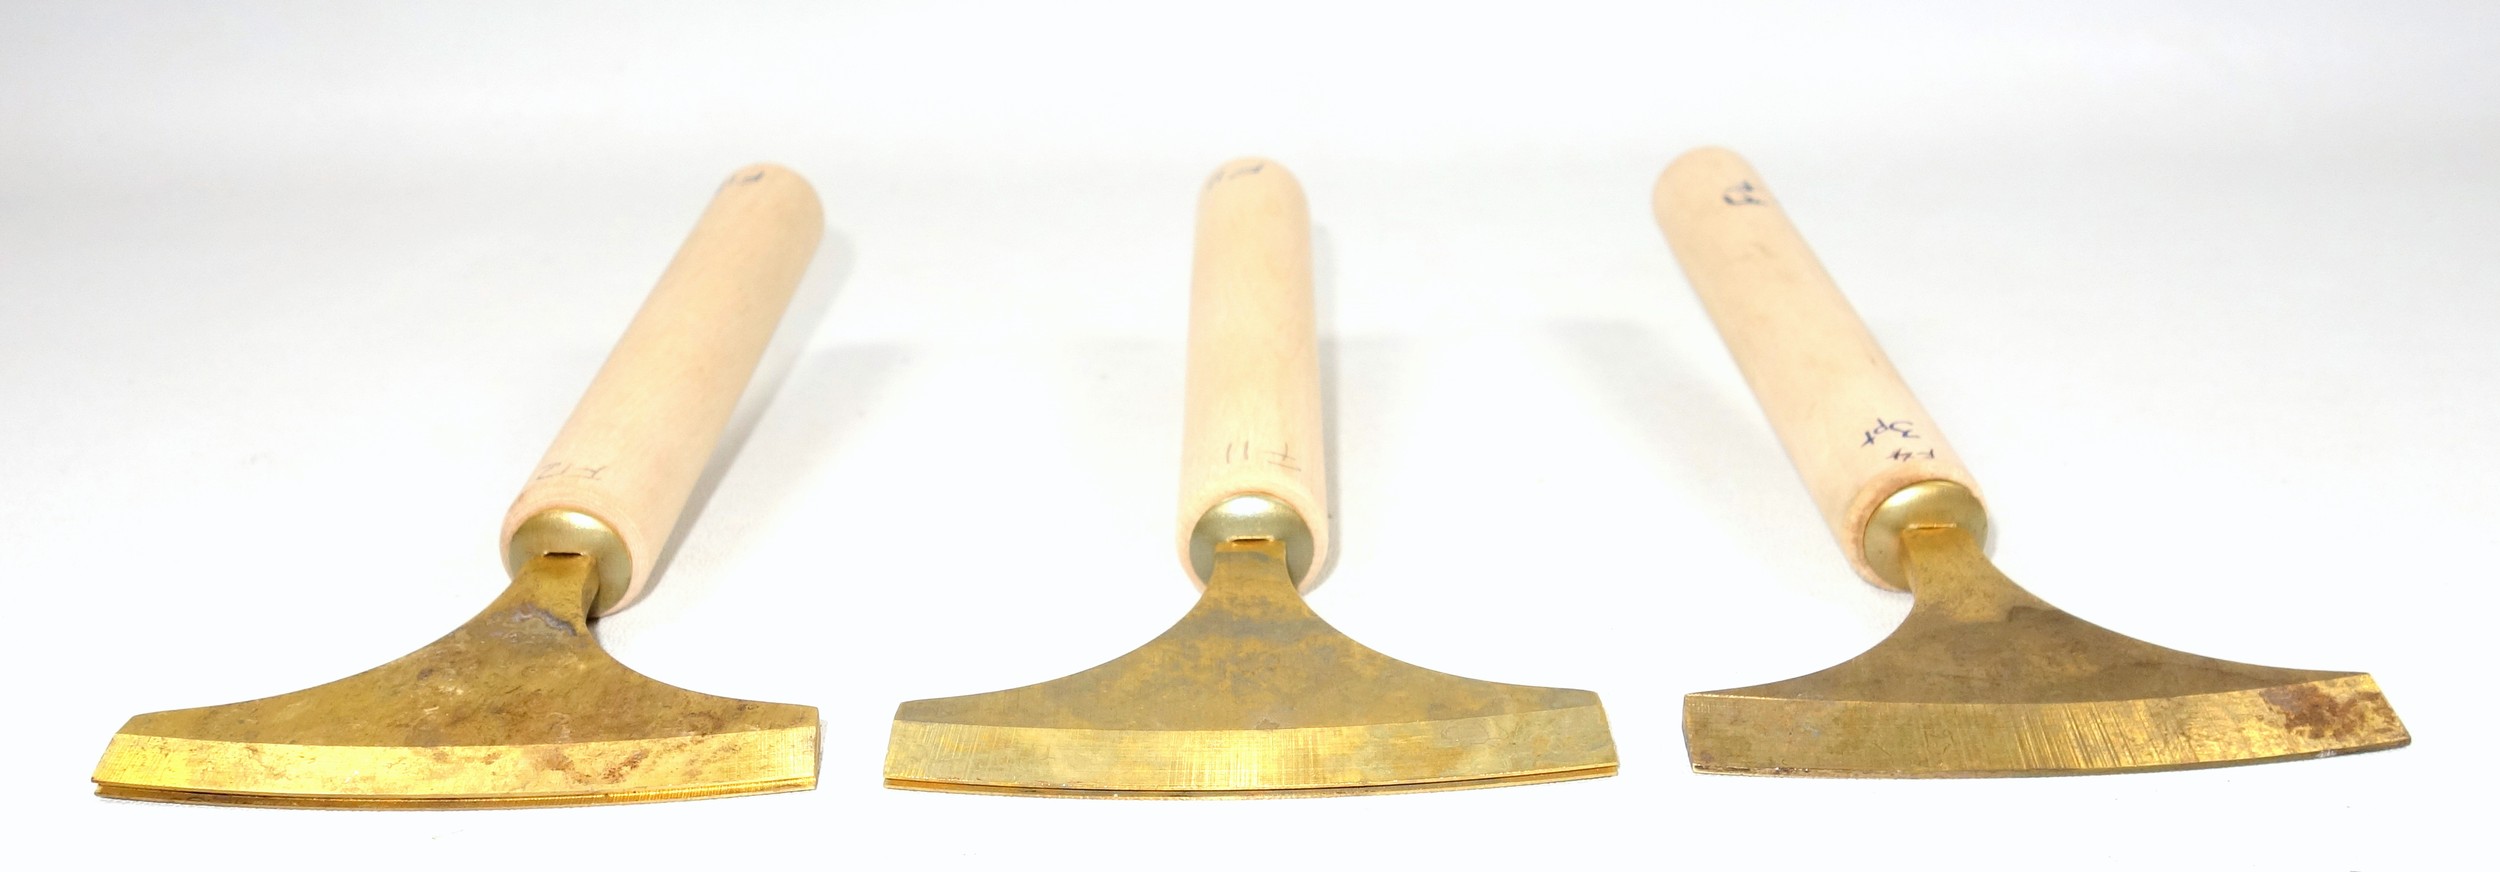 20 gold finishing hand tools comprising 12 gouges and 8 decorative and other pallets. (2) - Image 6 of 8